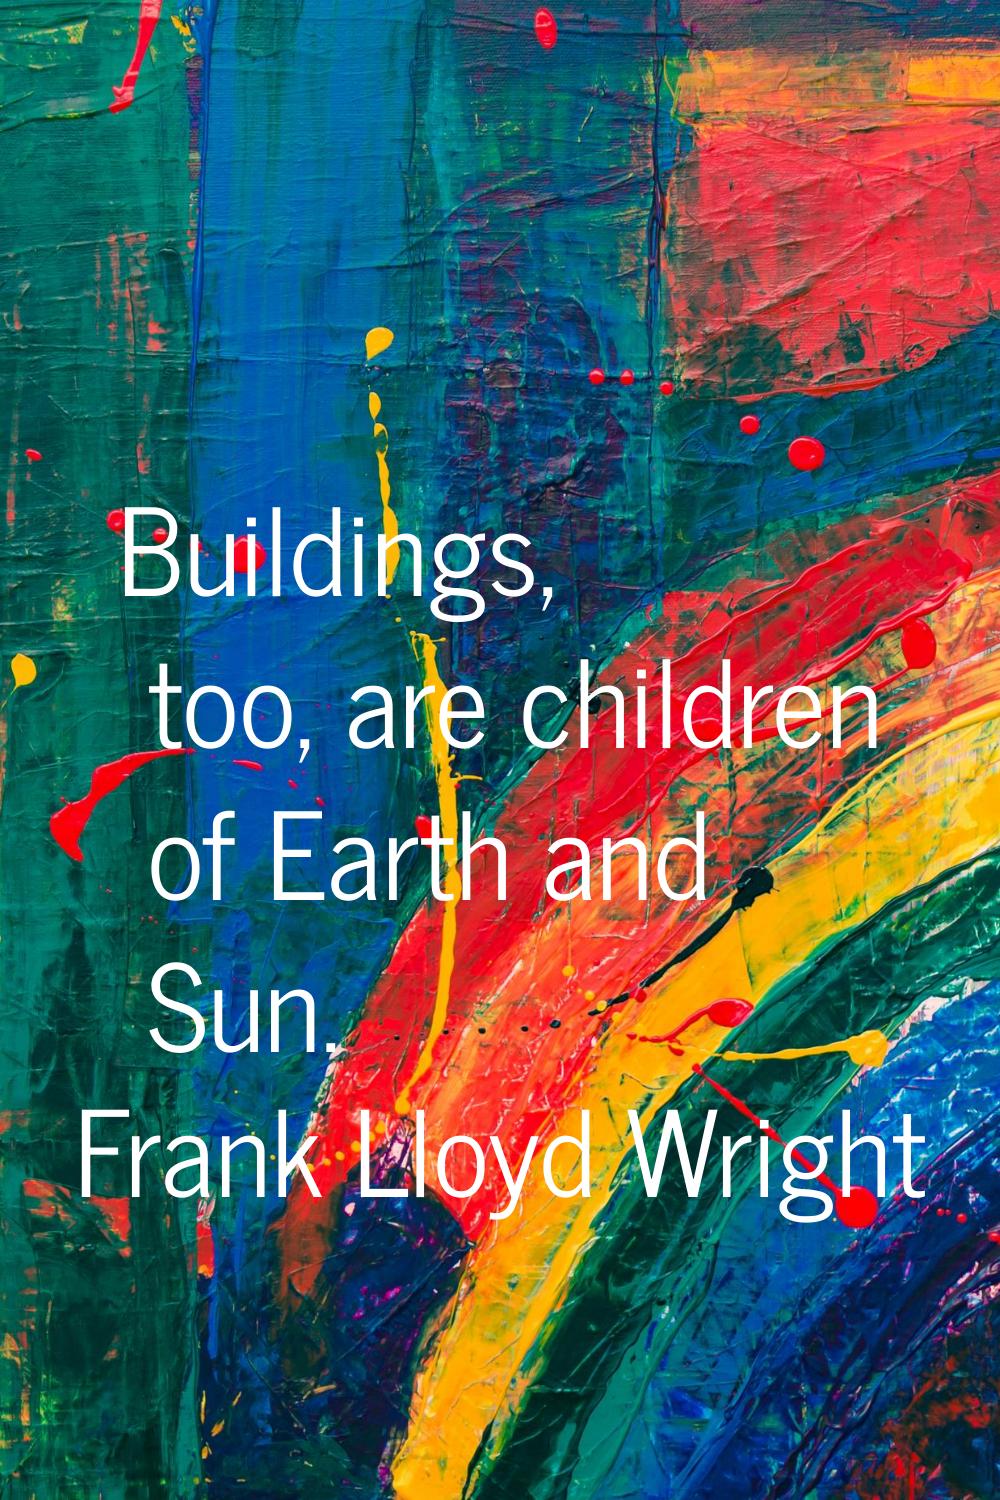 Buildings, too, are children of Earth and Sun.